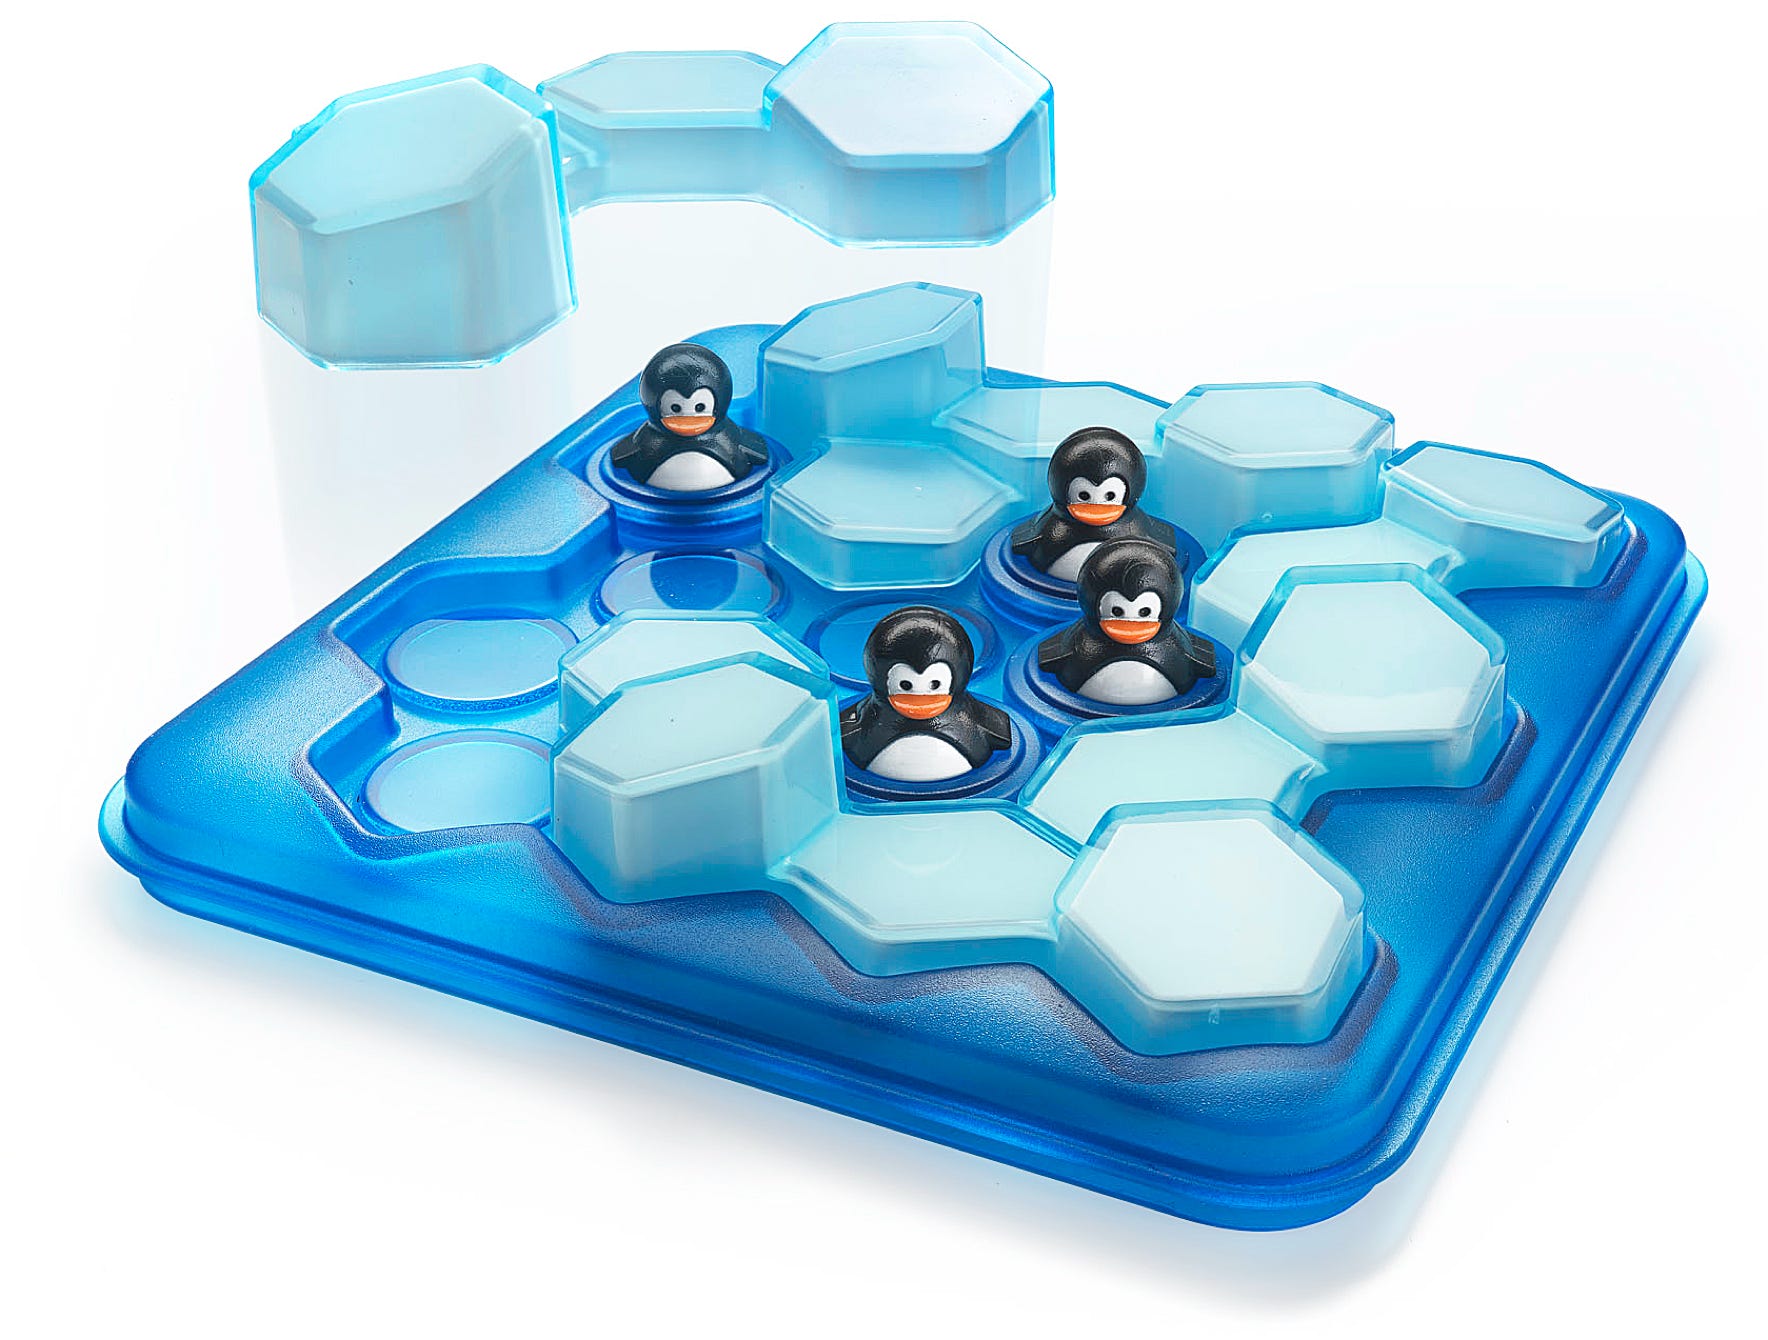 Game with penguins and ice puzzle pieces